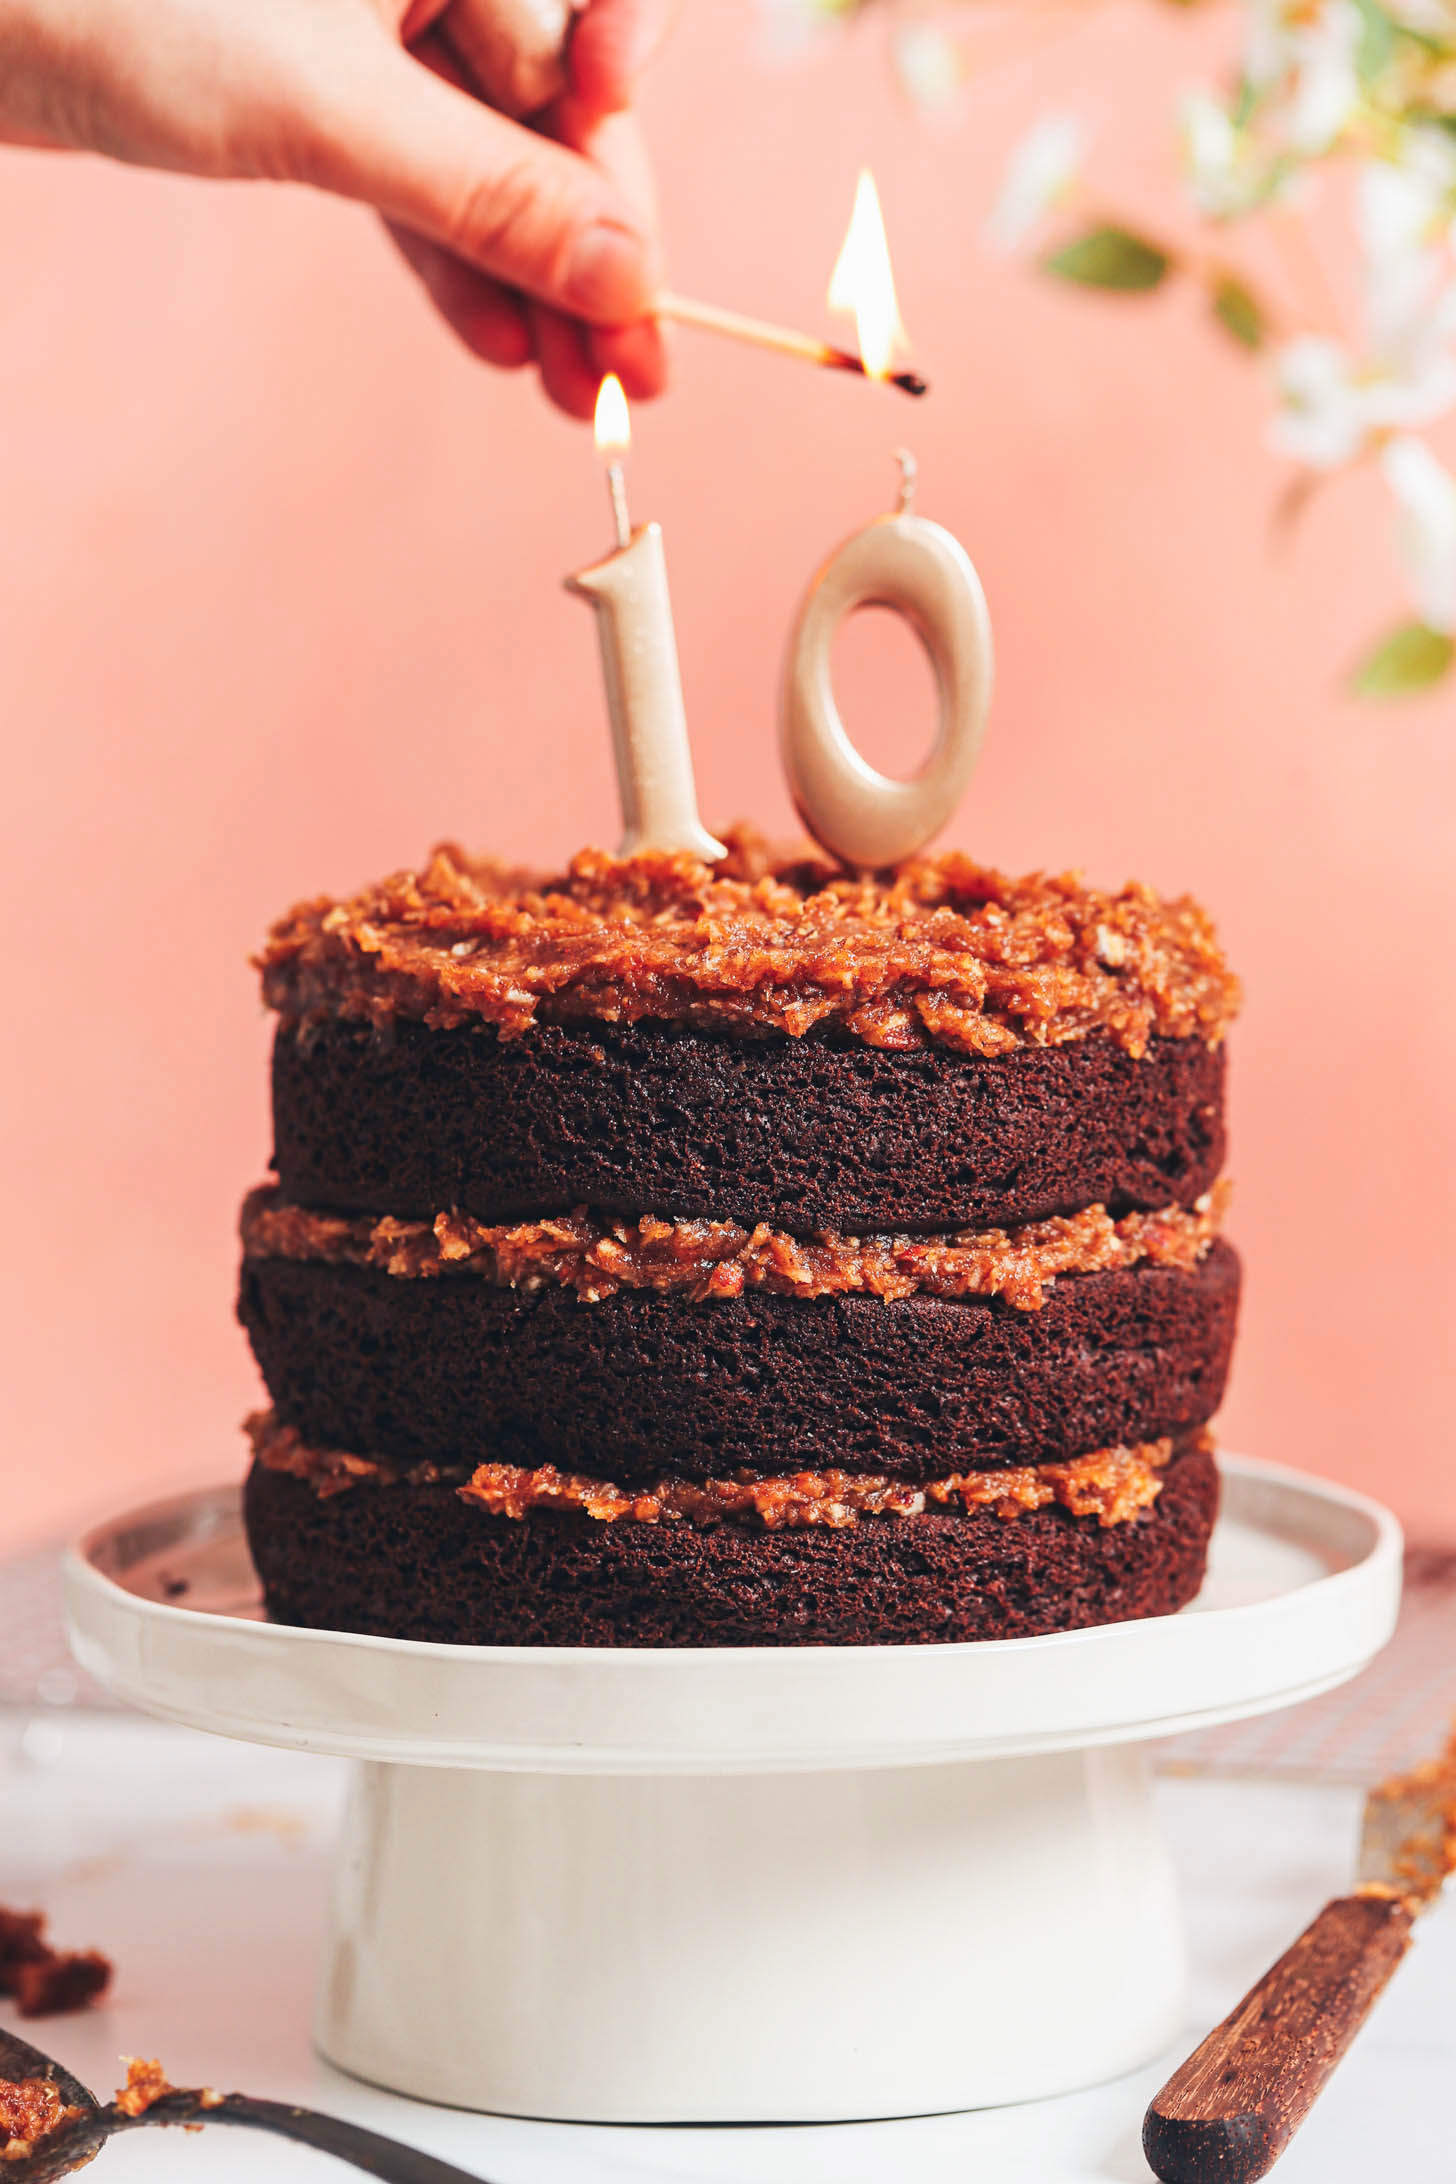 Lighting a candle on our vegan gluten-free German chocolate cake to celebrate our 10 year blogging anniversary